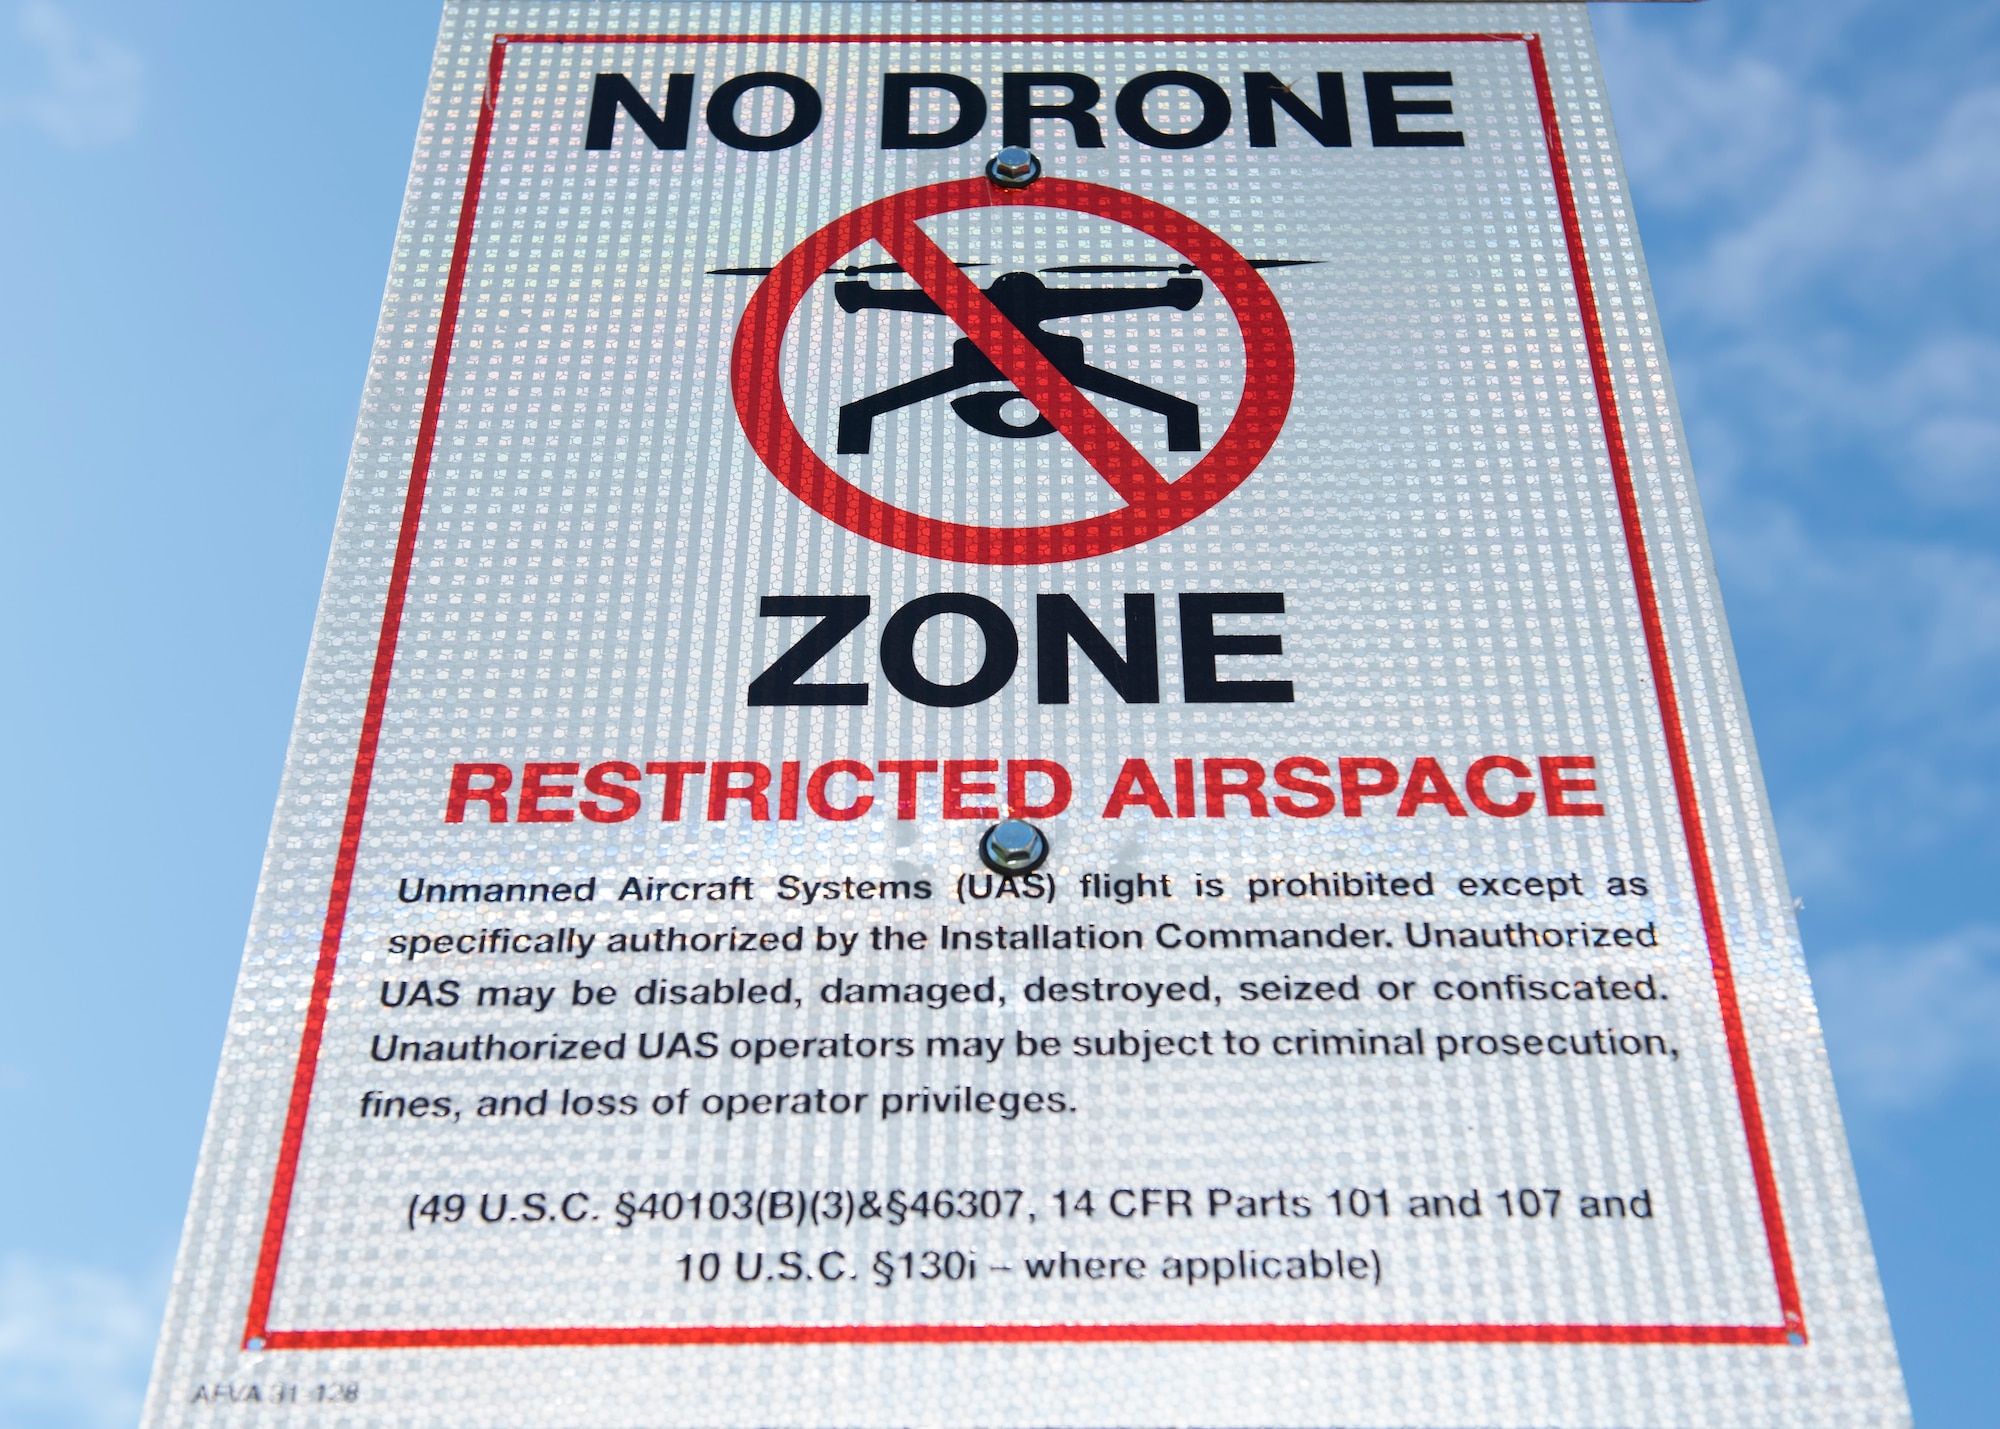 Small Unmanned Aircraft Systems (sUAS) or drone flying is prohibited at MacDill Air Force Base, Florida. Per the Federal Aviation Administration (FAA), drones can’t be flown within a 5-mile radius of military airfields or commercial airports. The FAA and Department of Defense (DOD) instituted the ban on sUAS, or drones, in response to the rising popularity of private sUAS and the possible security risk they pose, along with the potential physical danger to aircraft from hitting a drone during take-off or landing. (U.S. Air Force photo by Senior Airman Ryan Lackey)